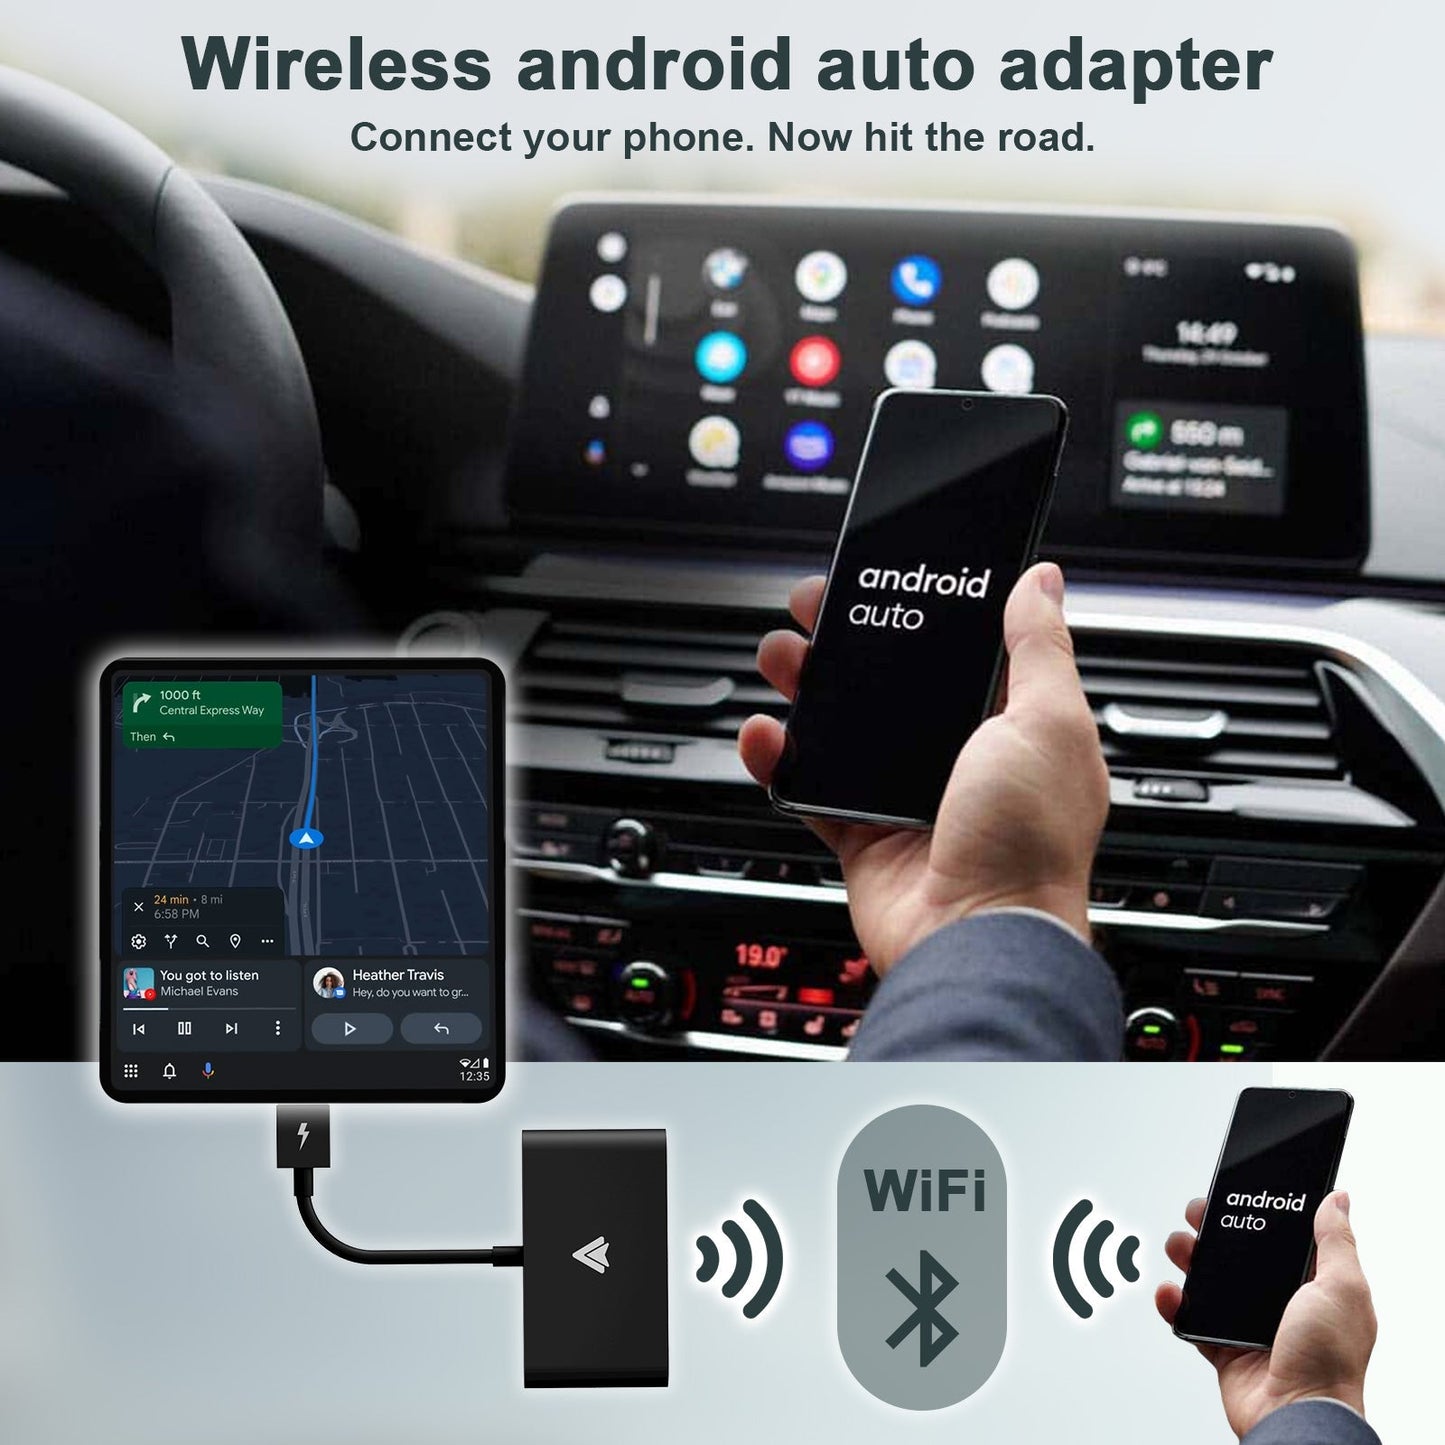 EXPLOTER Wired Android Auto Convert to Wireless CP-800 B21 Wi-Fi 2.4GHz and 5GHz Automatically connect